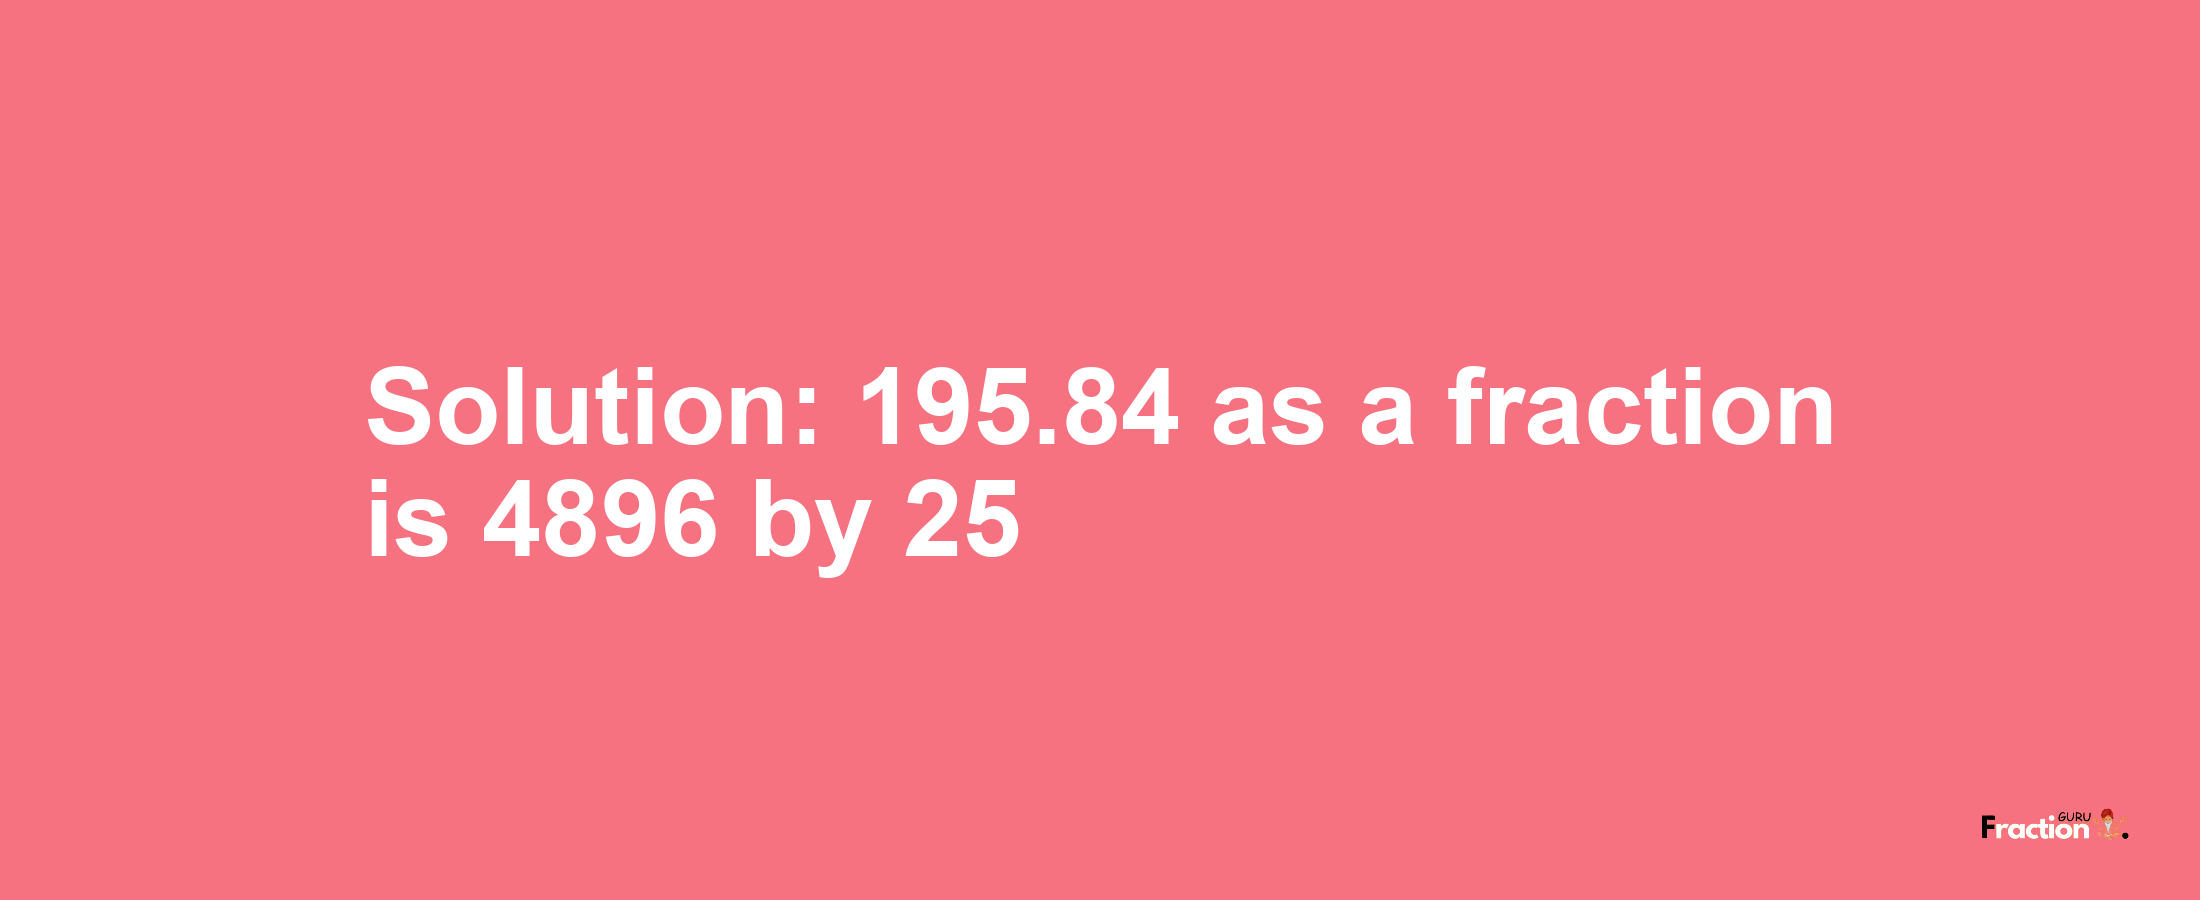 Solution:195.84 as a fraction is 4896/25